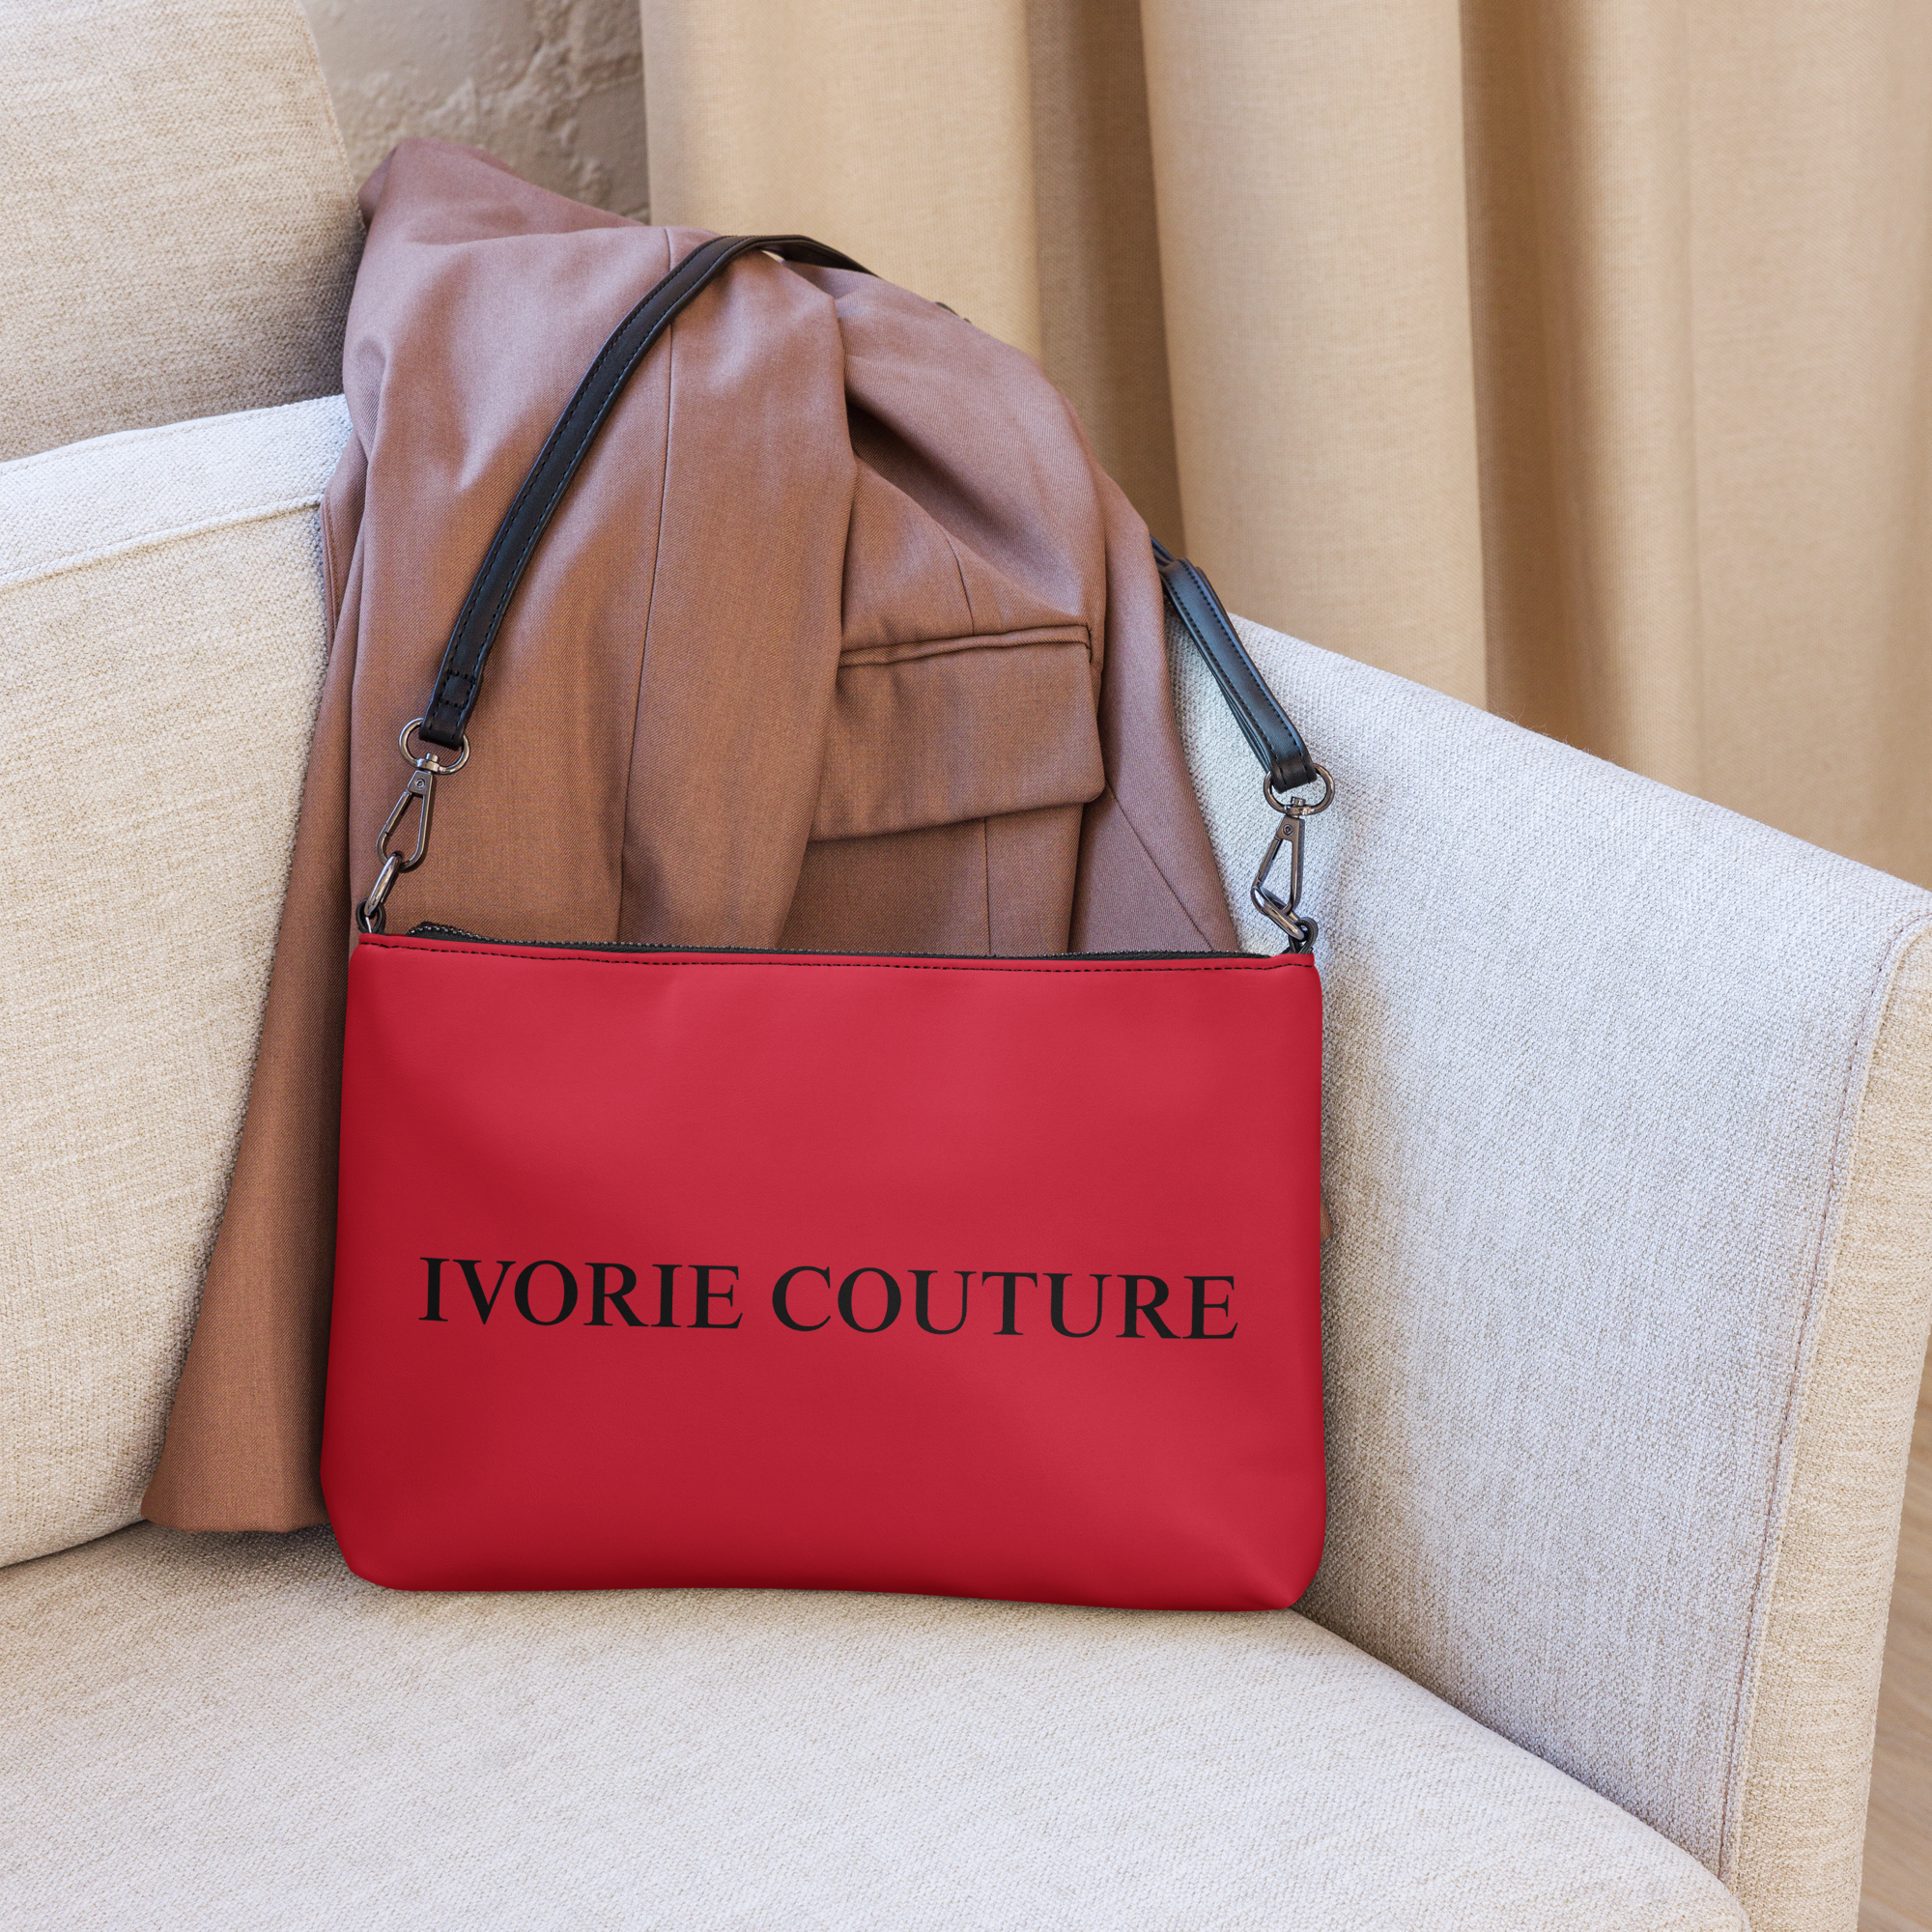 Riches Couture Crimsona Crossbody bag purse red on couch with clothing article